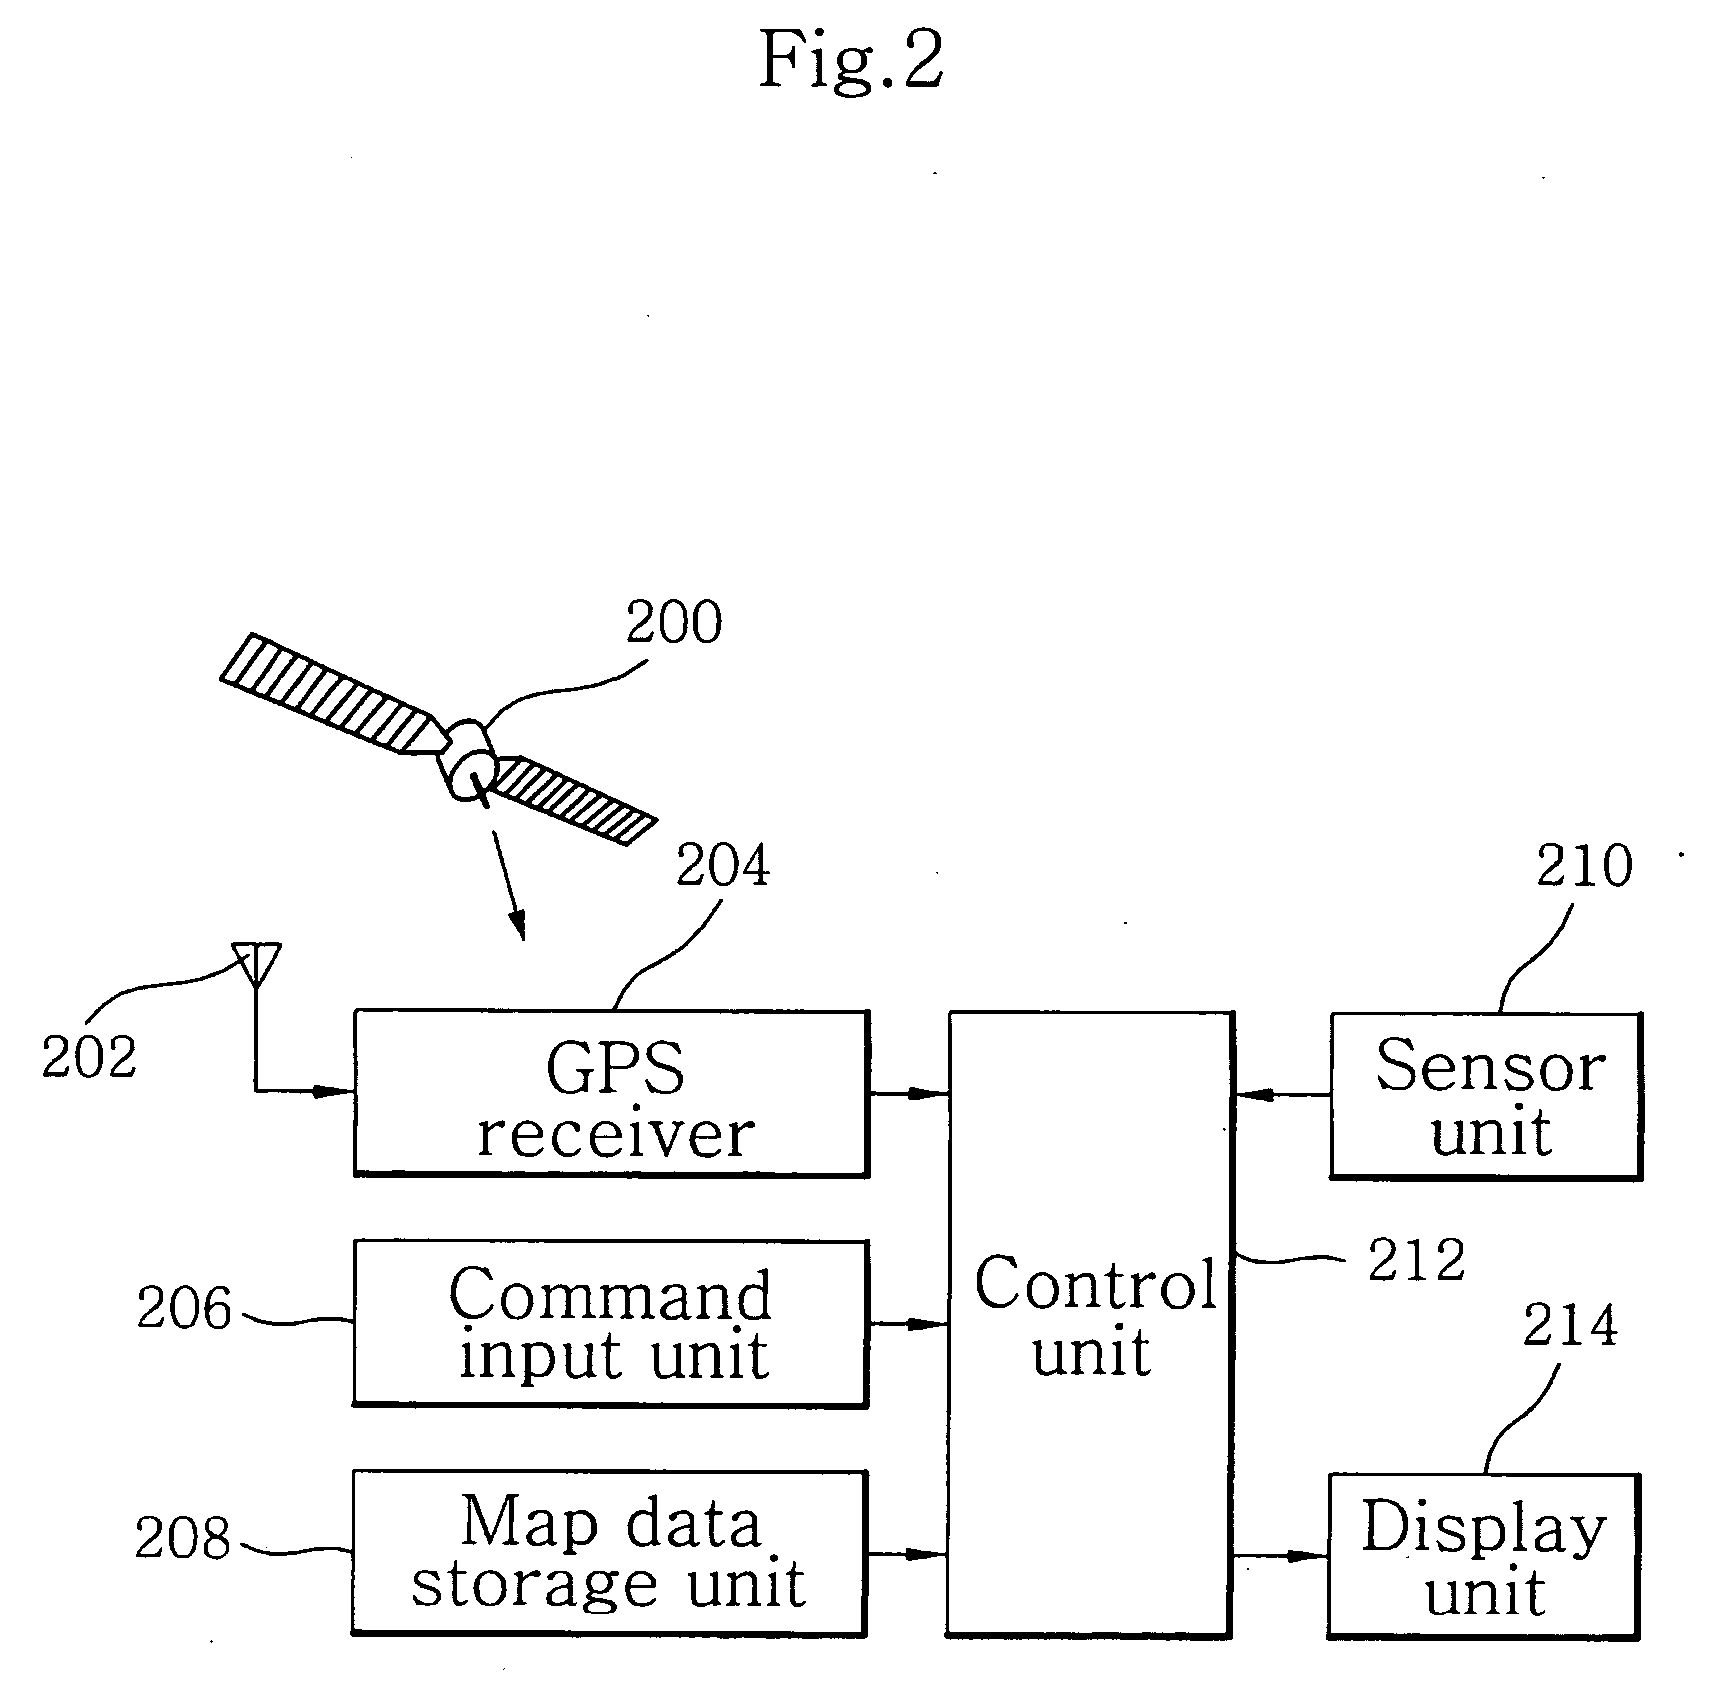 Apparatus and method for detecting vehicle location in navigation system